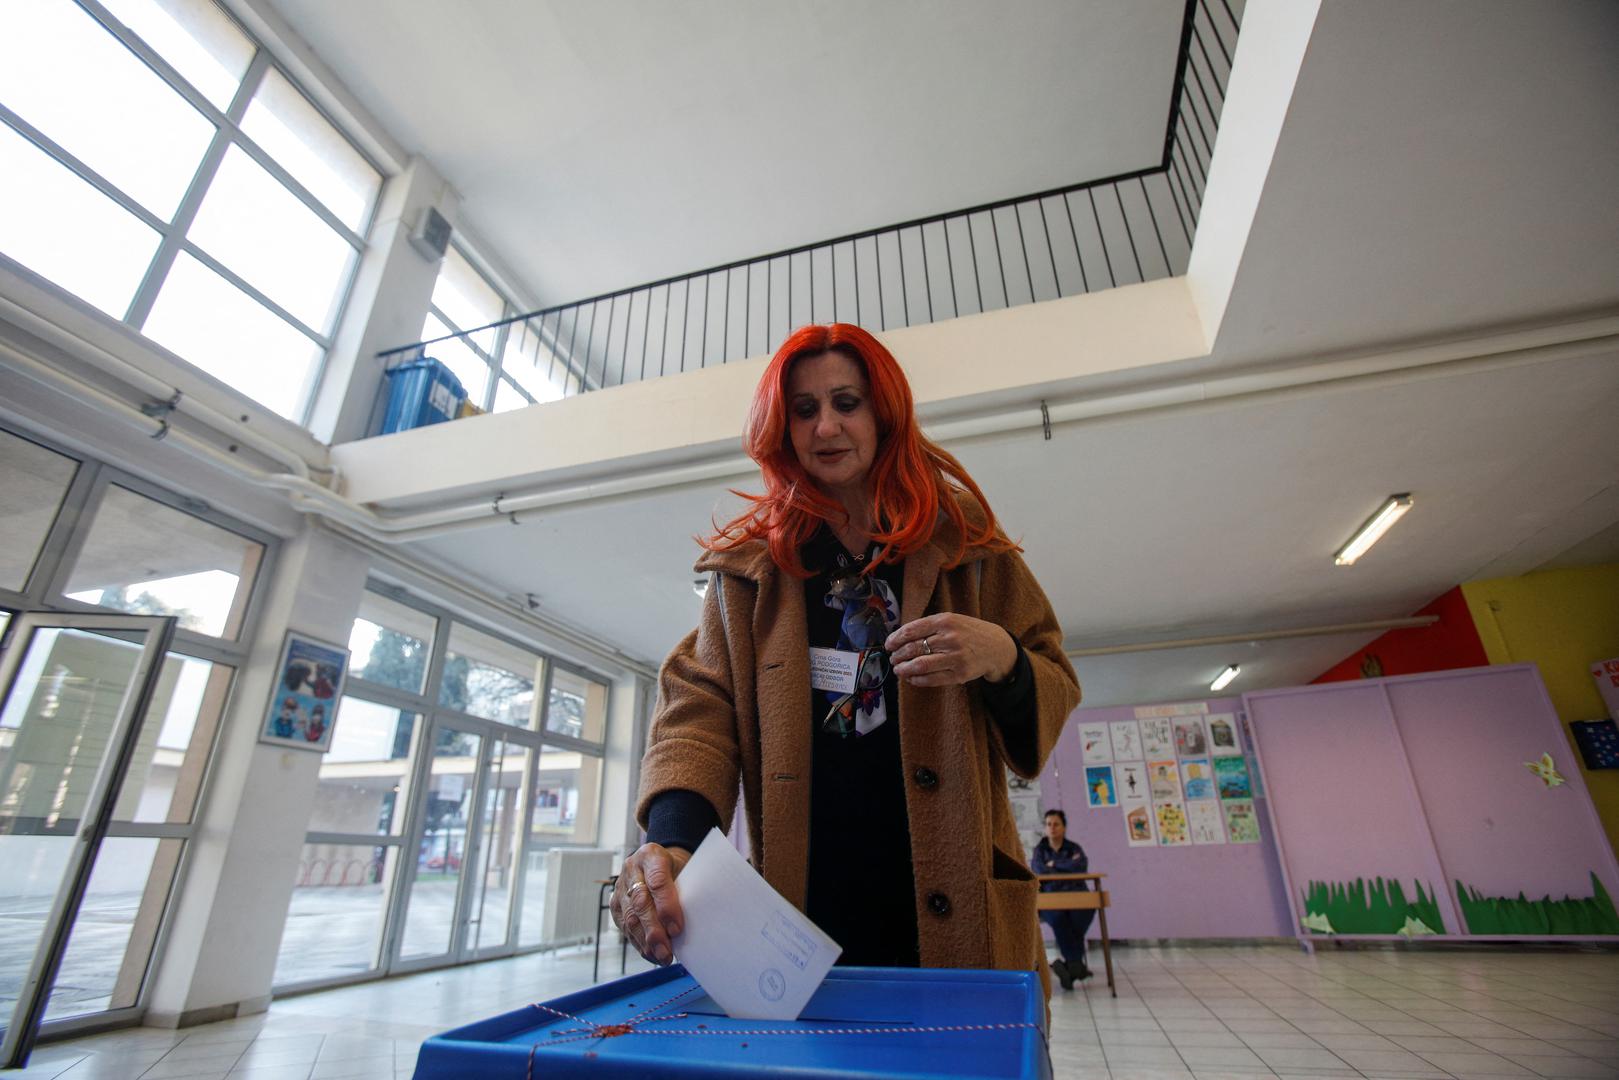 A woman casts her ballot at a polling station during the presidential elections in Podgorica, Montenegro, March 19, 2023. REUTERS/Stevo Vasiljevic Photo: STEVO VASILJEVIC/REUTERS